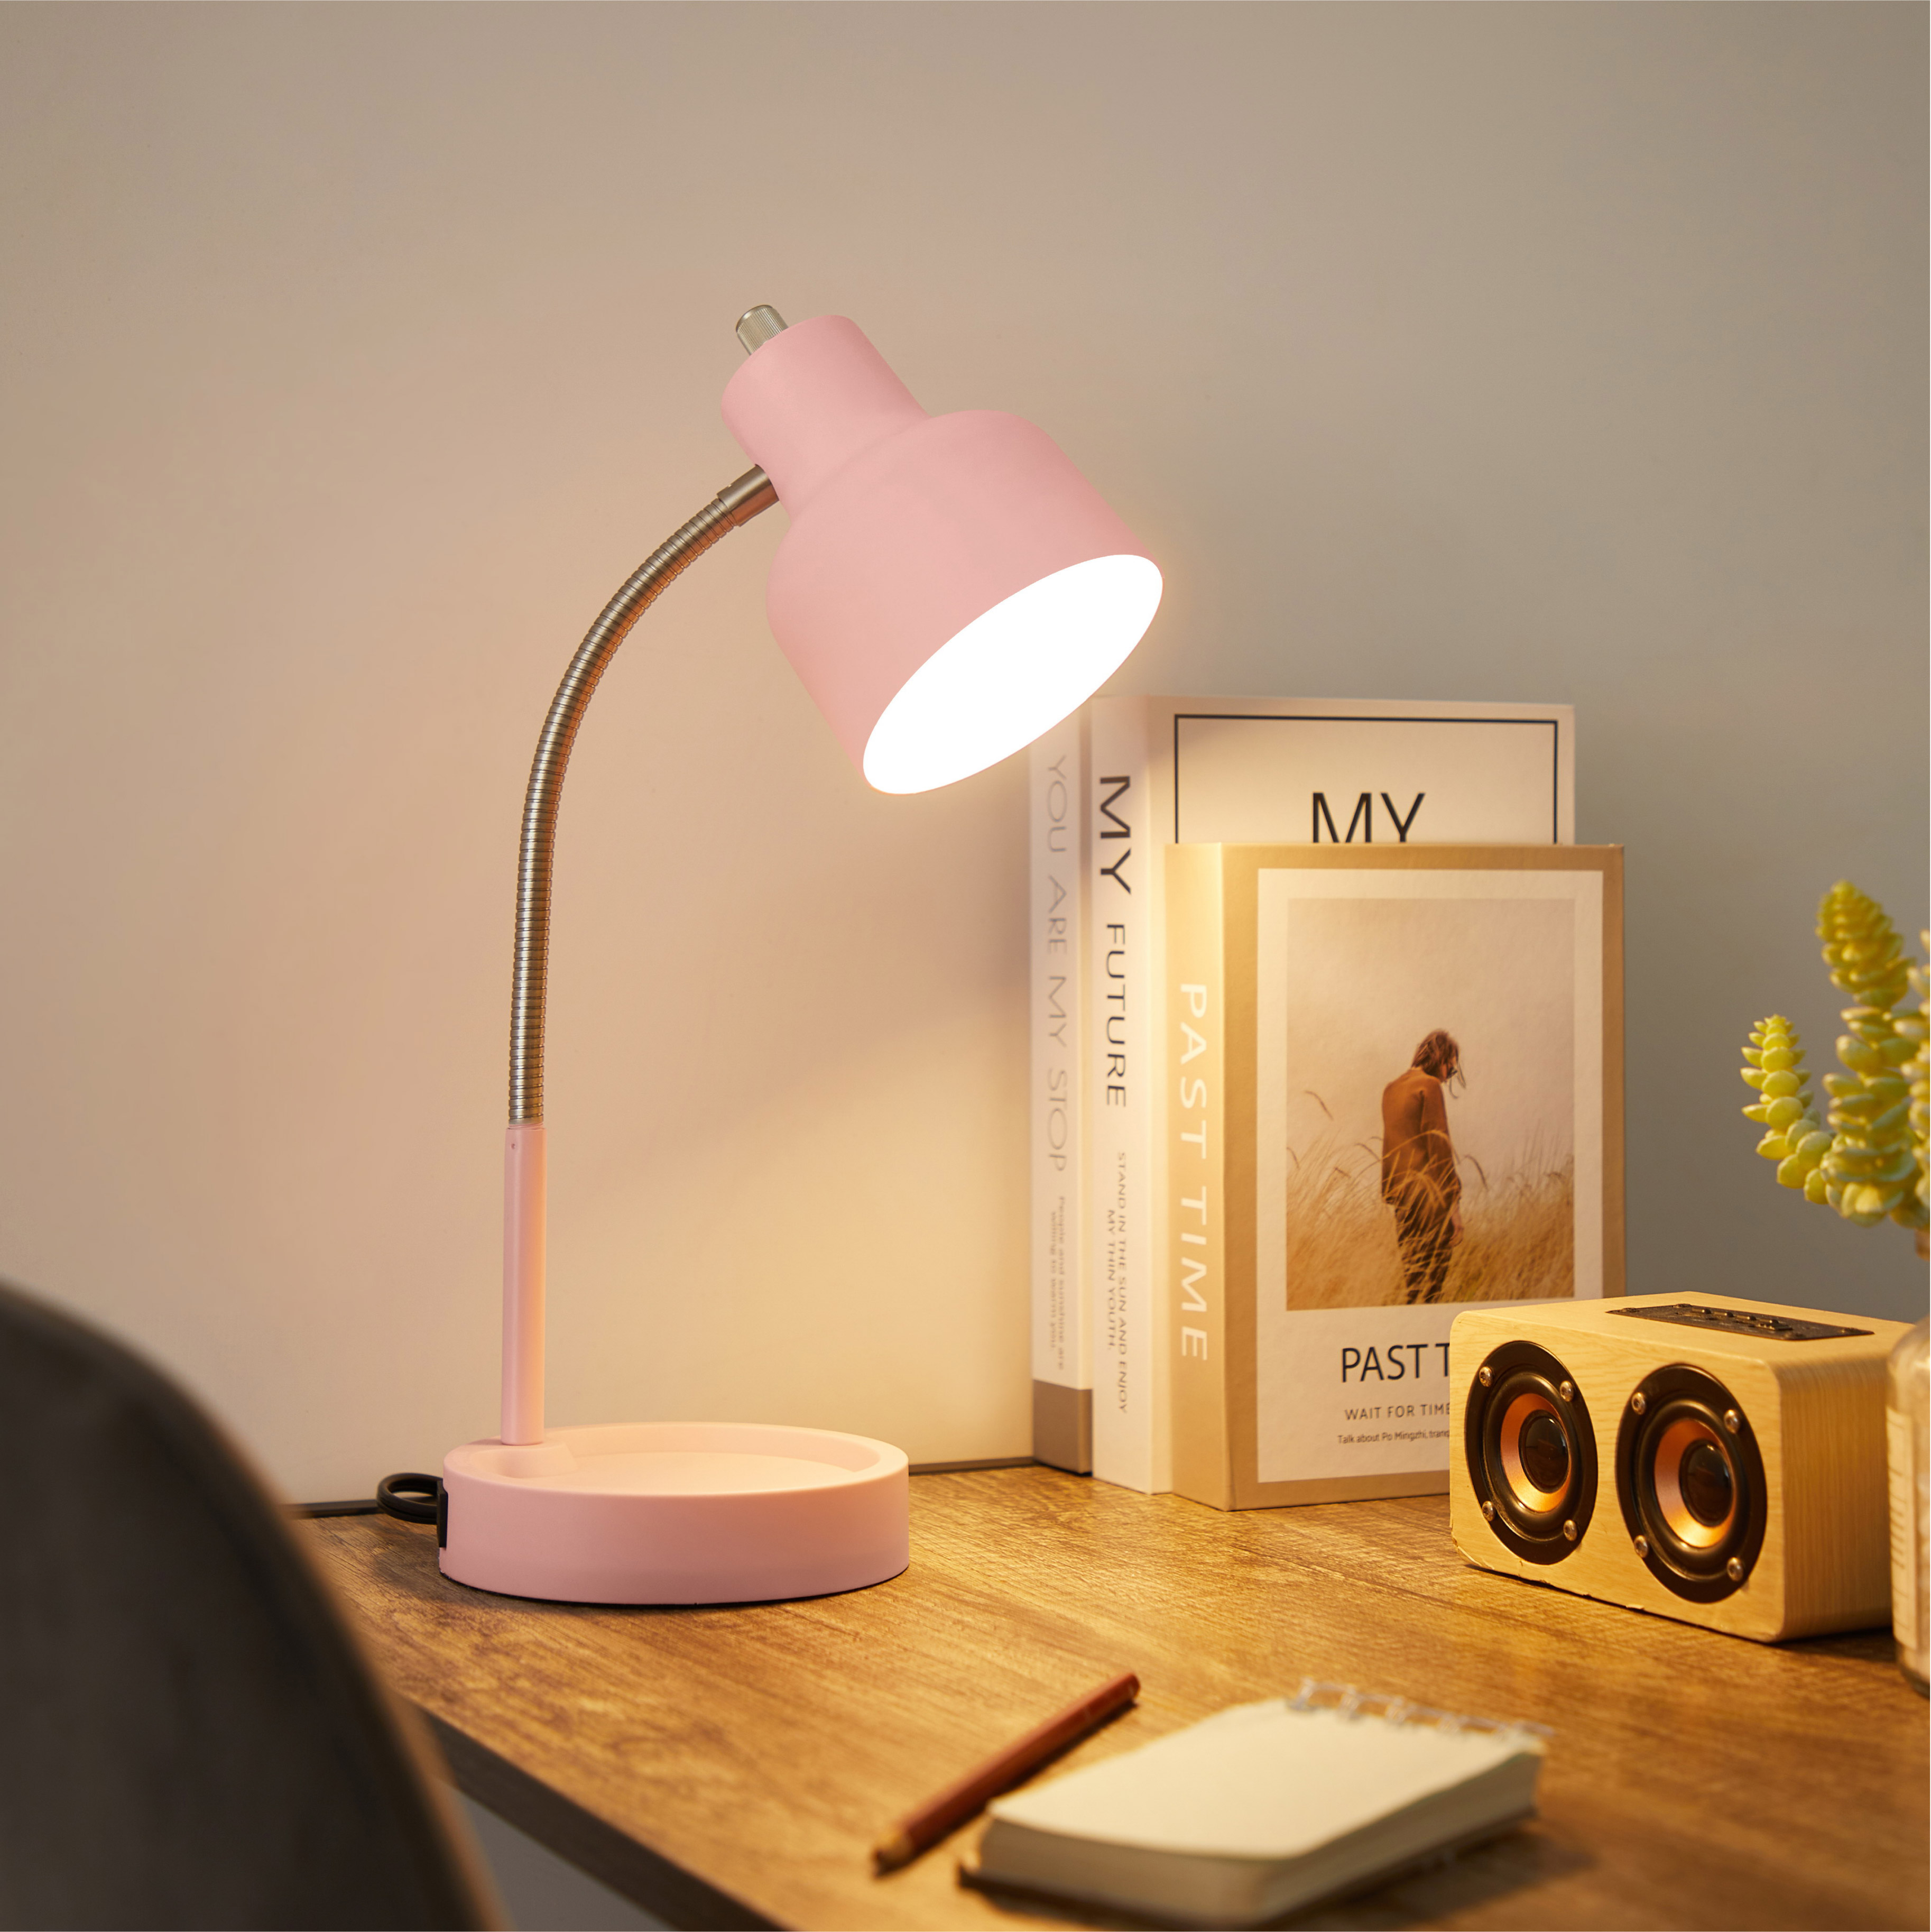 Mainstays LED Desk Lamp with Catch-All Base & AC Outlet, Matte Blush Pink - image 2 of 10